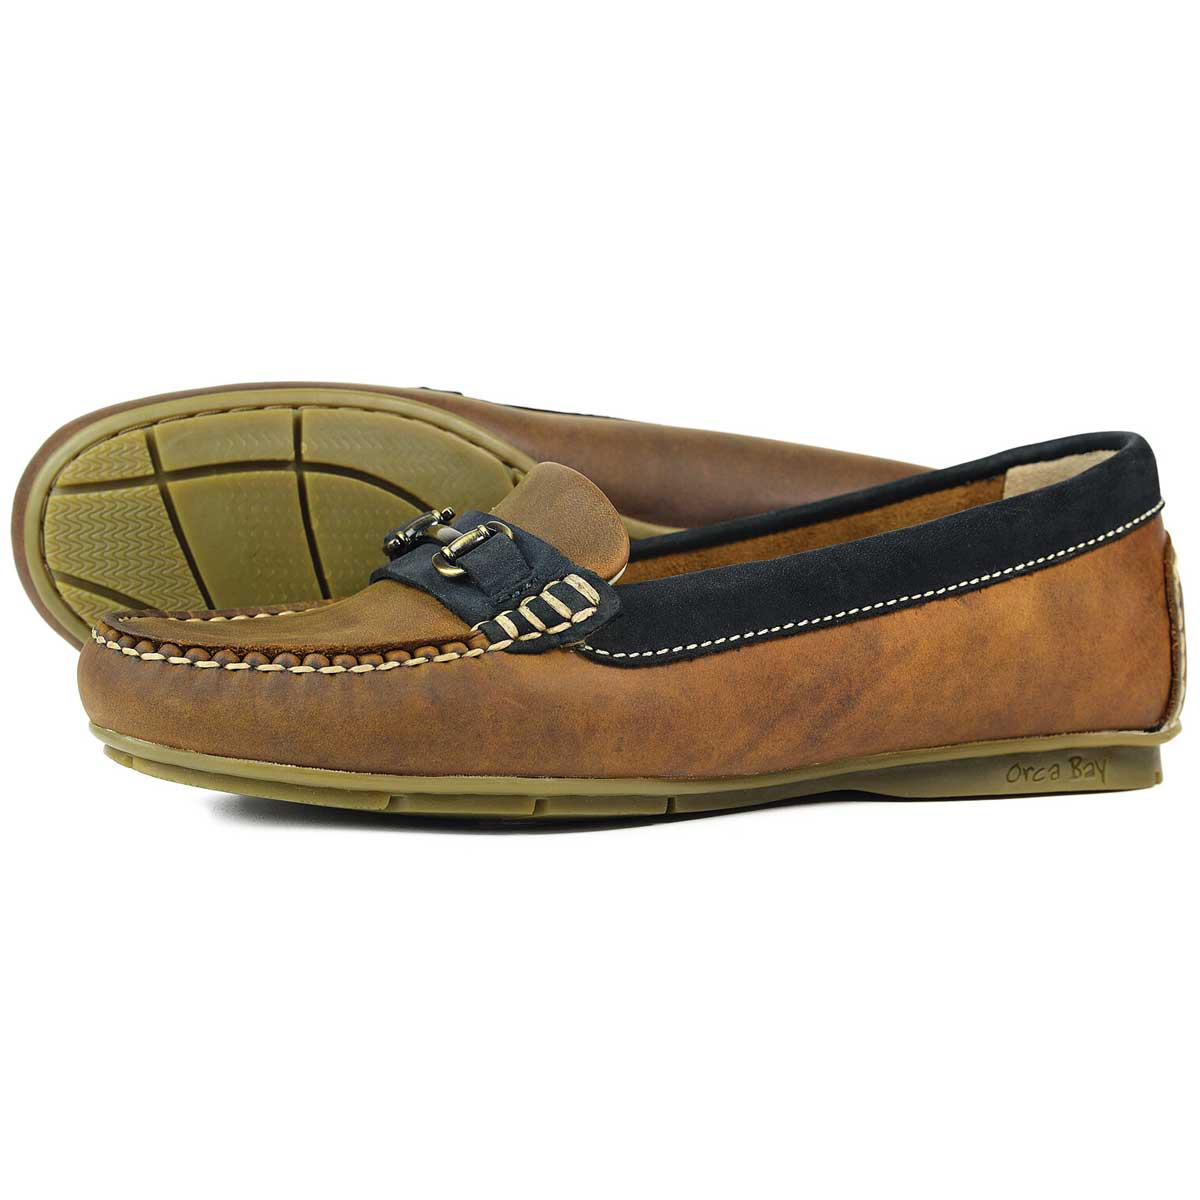 ORCA BAY Verona Leather Loafers - Sand / Navy